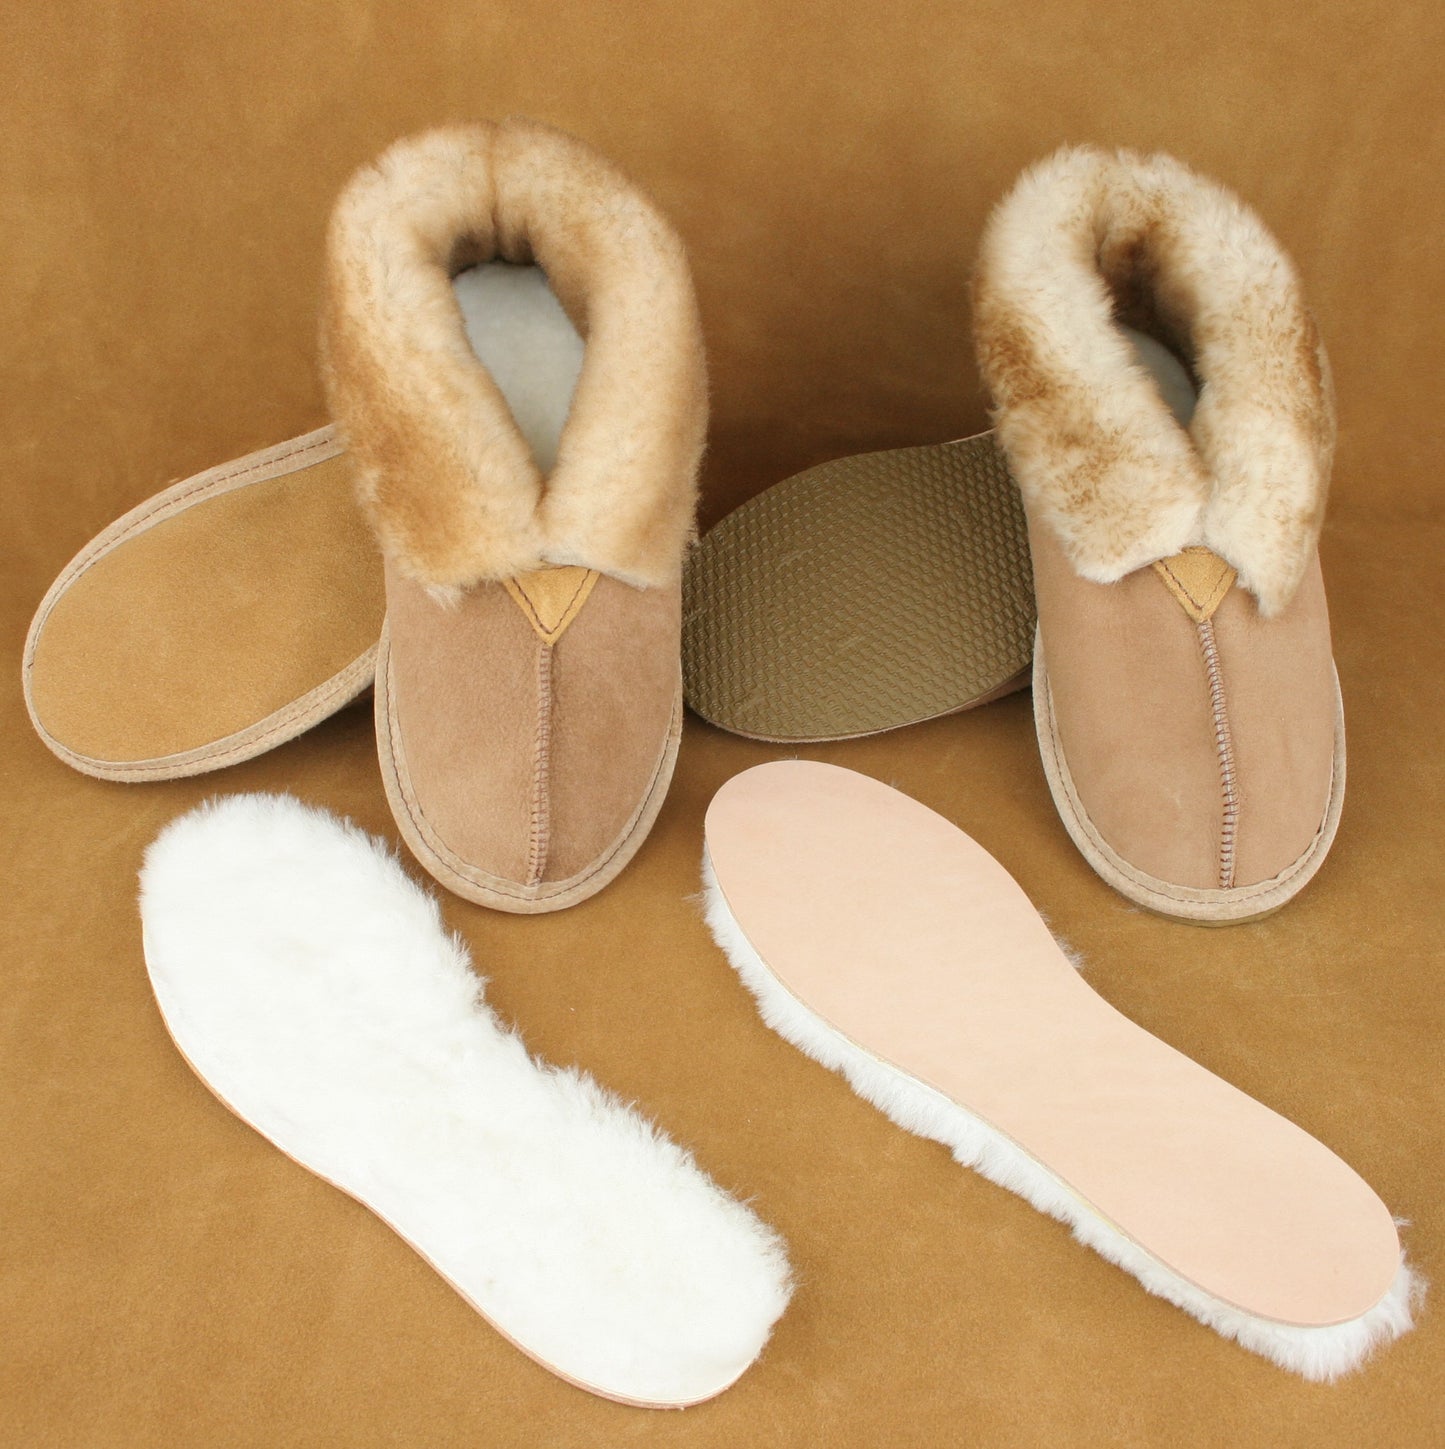 All American Replacement Sheepskin Innersoles for Men's Slippers